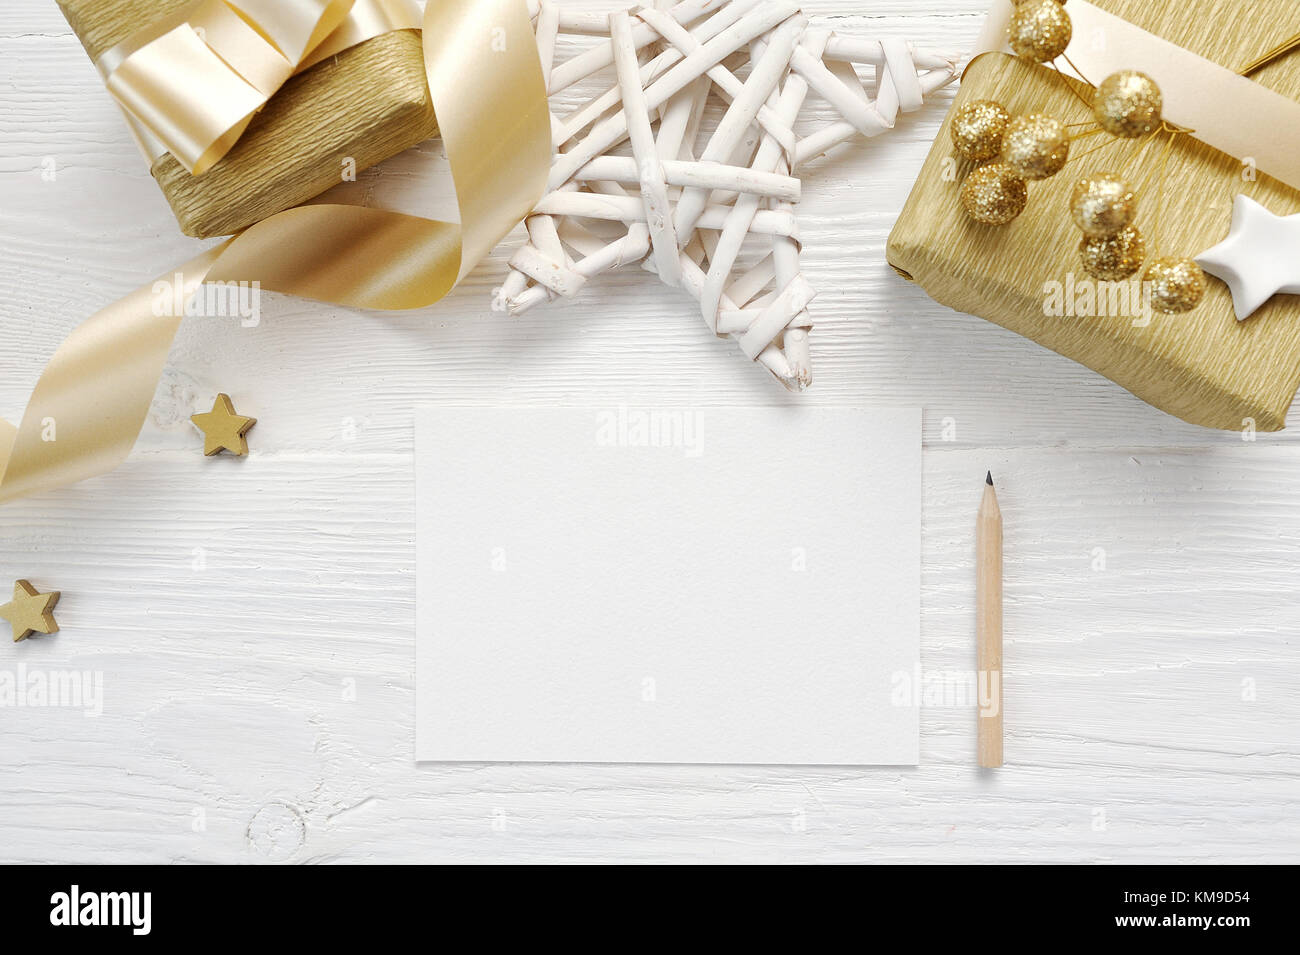 Mockup Christmas greeting card with gold gift ribbon, flatlay on a white wooden background, with place for your text Stock Photo